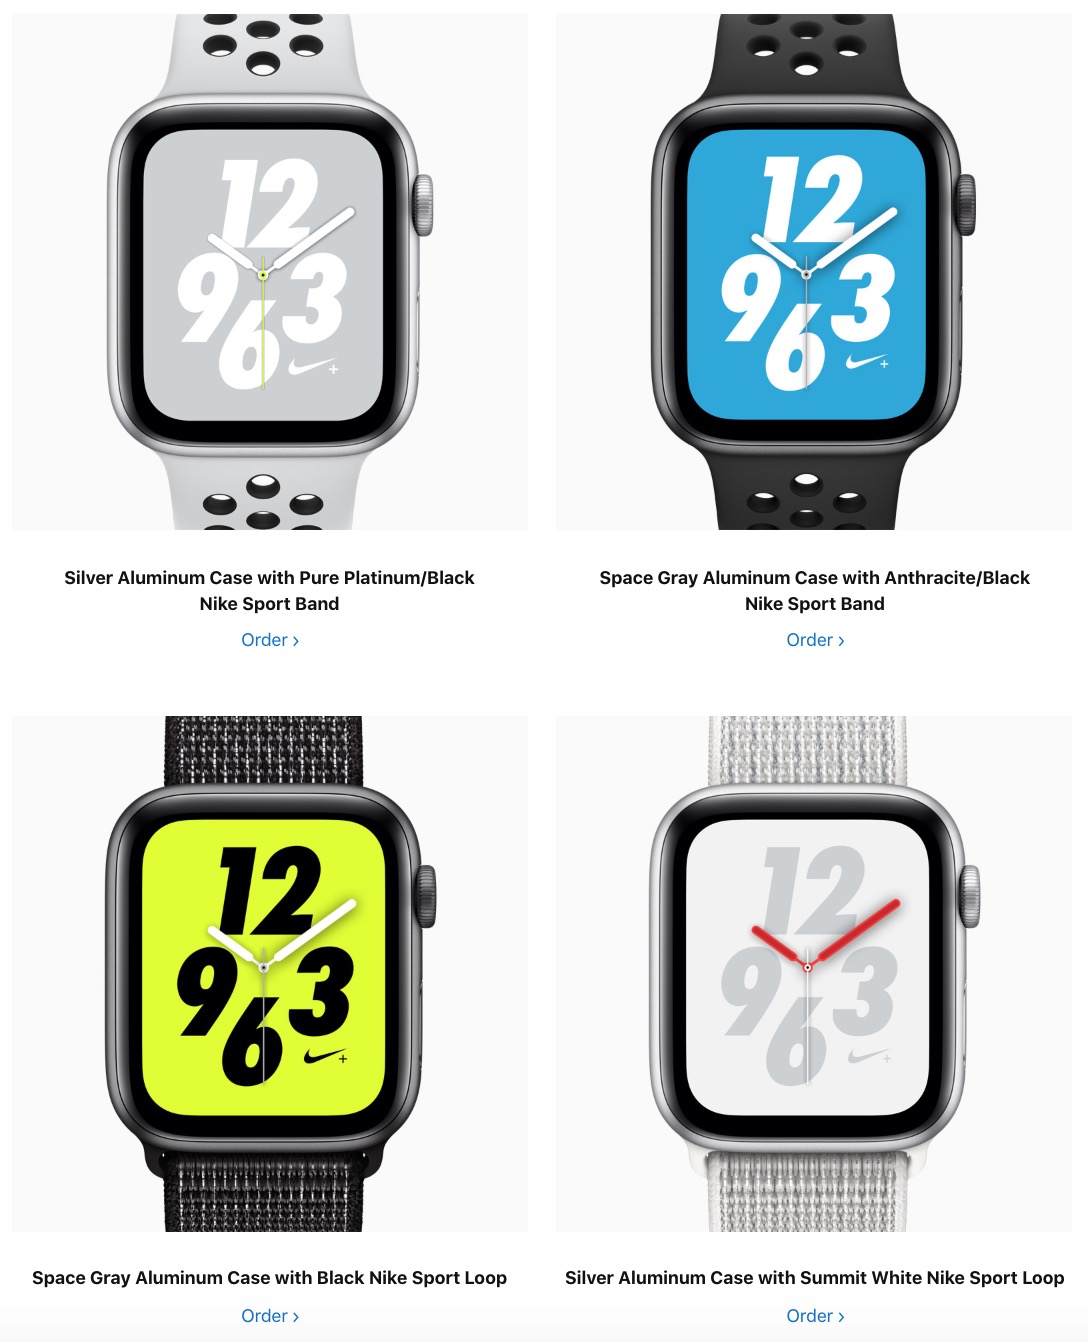 Apple Watch Nike+ Series 4 Now Available